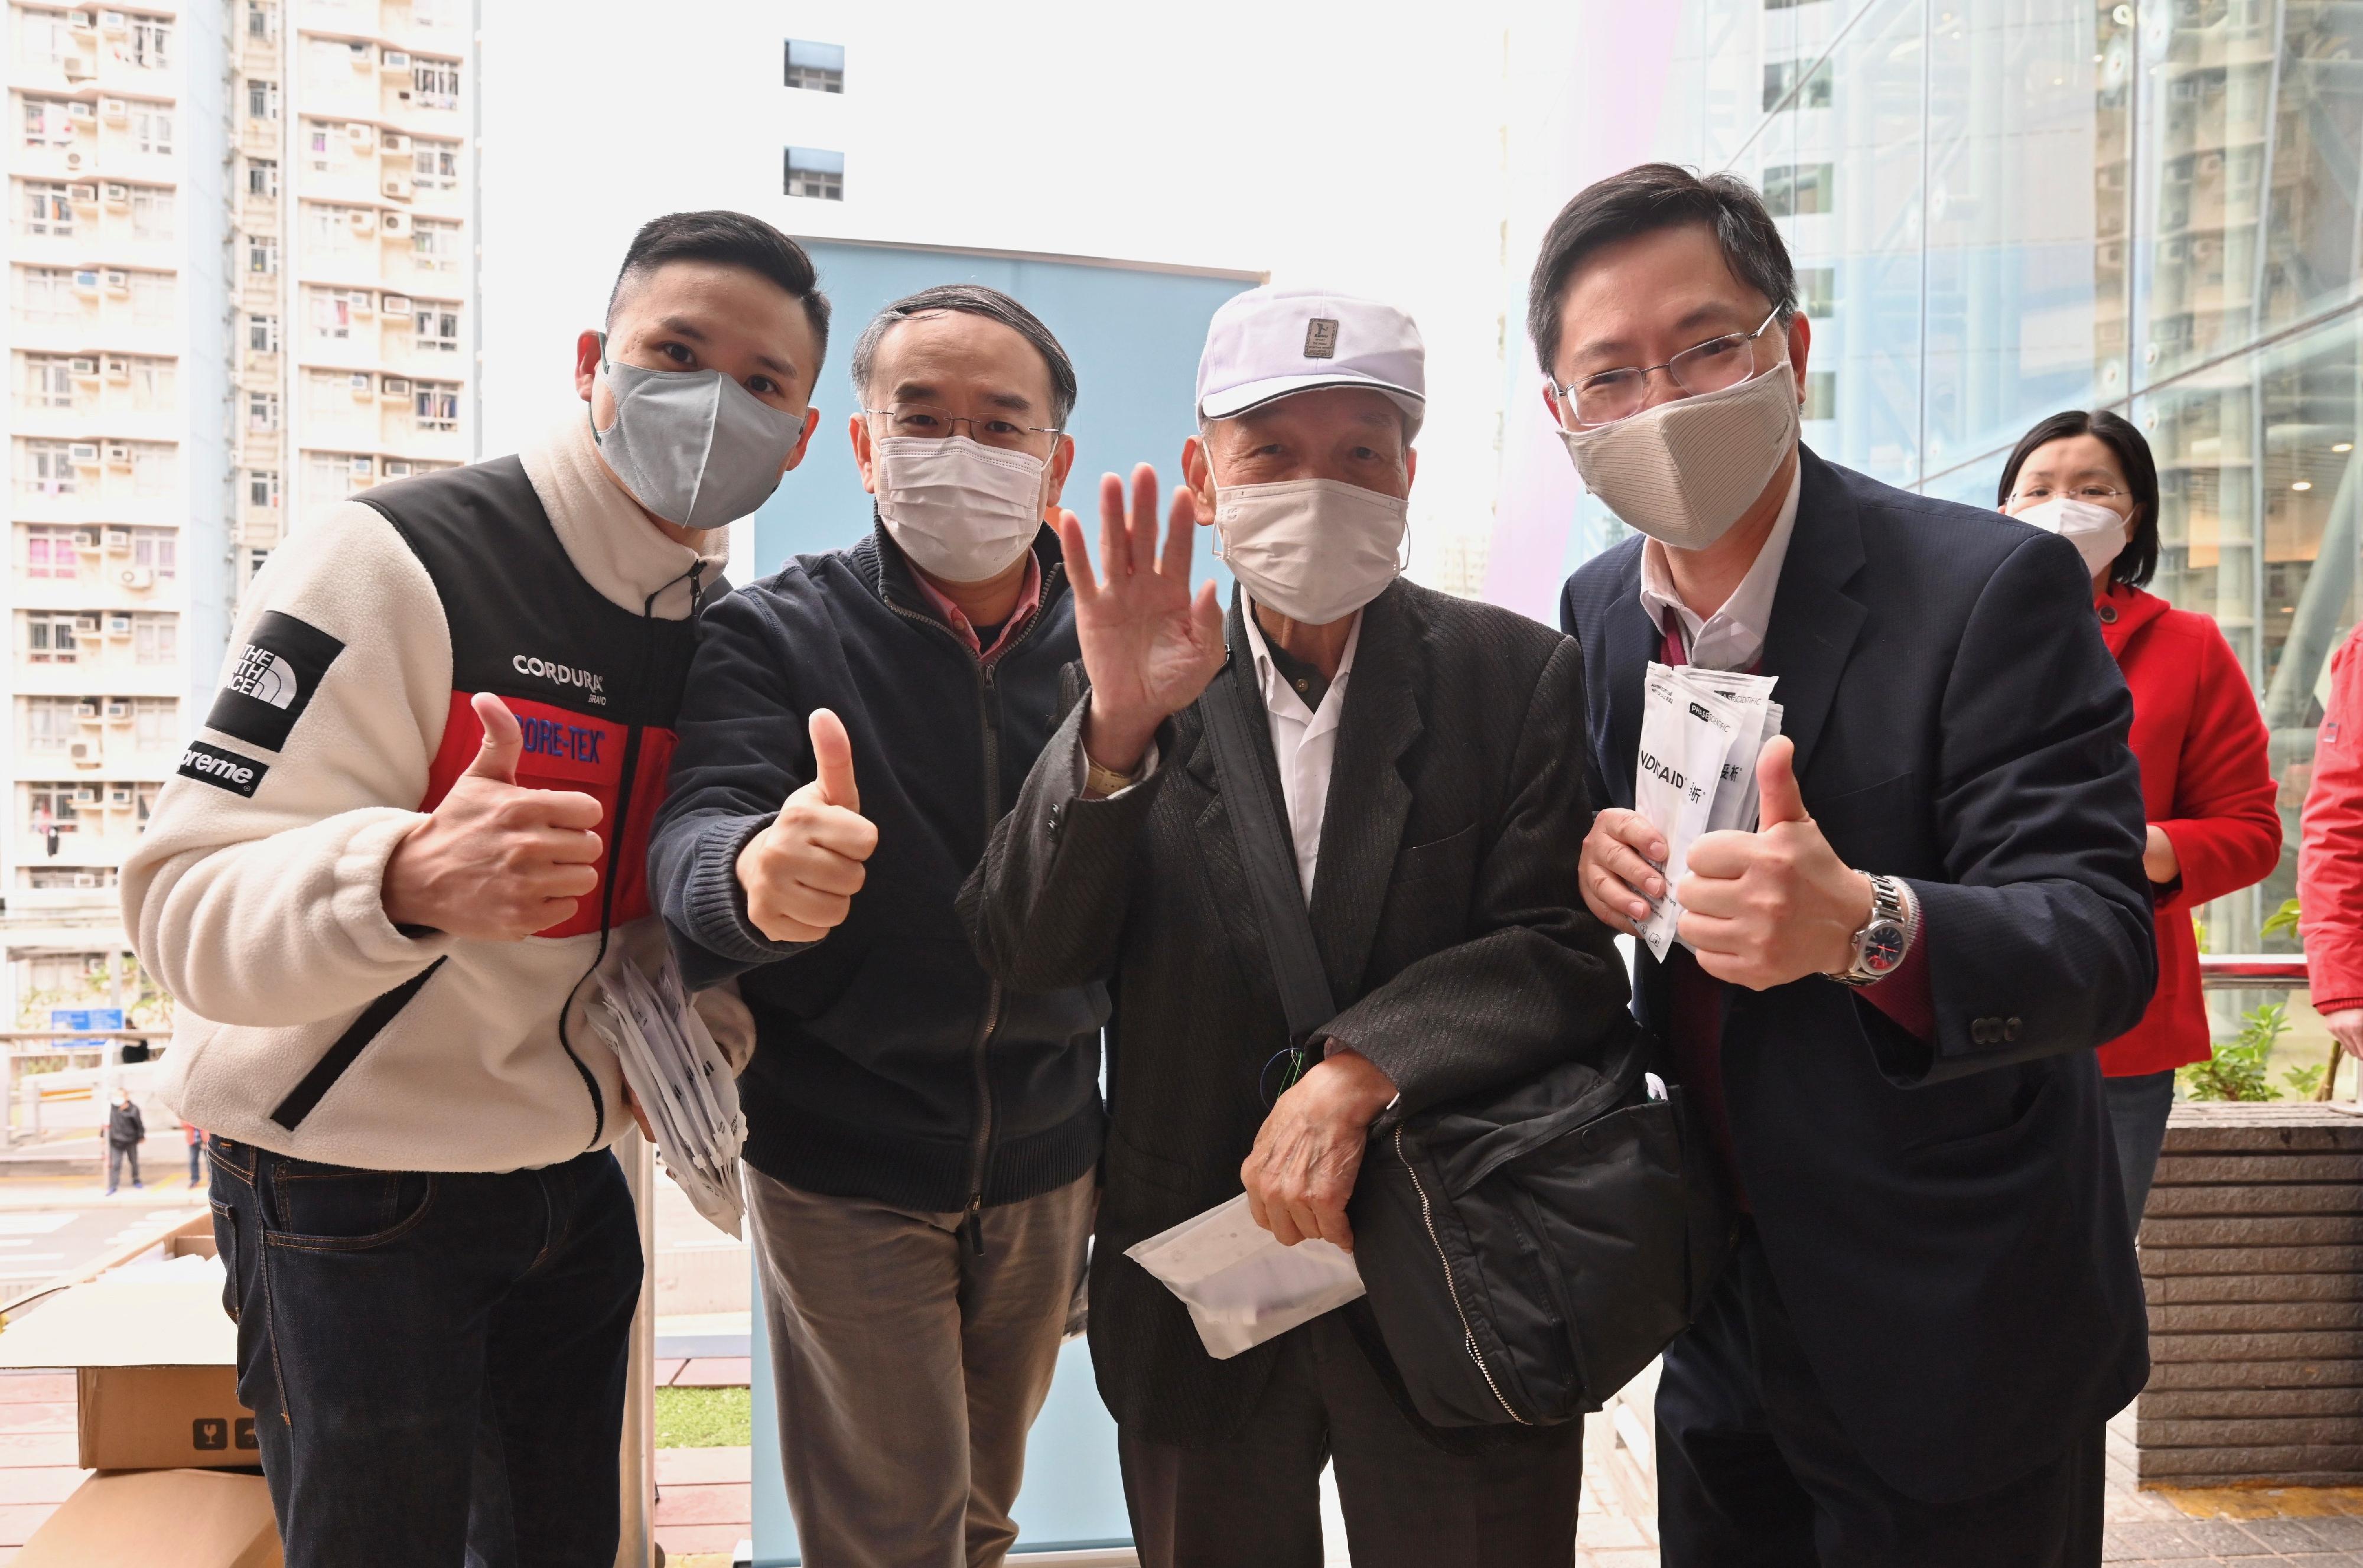 The Secretary for Innovation and Technology, Mr Alfred Sit (first right), and the Secretary for Financial Services and the Treasury, Mr Christopher Hui (second left) participate in an activity organised by the Wong Tai Sin District Office to distribute COVID-19 rapid test kit at Tsz Wan Shan Shopping Centre today (February 3). Looking on is the District Officer (Wong Tai Sin), Mr Steve Wong (first left). 